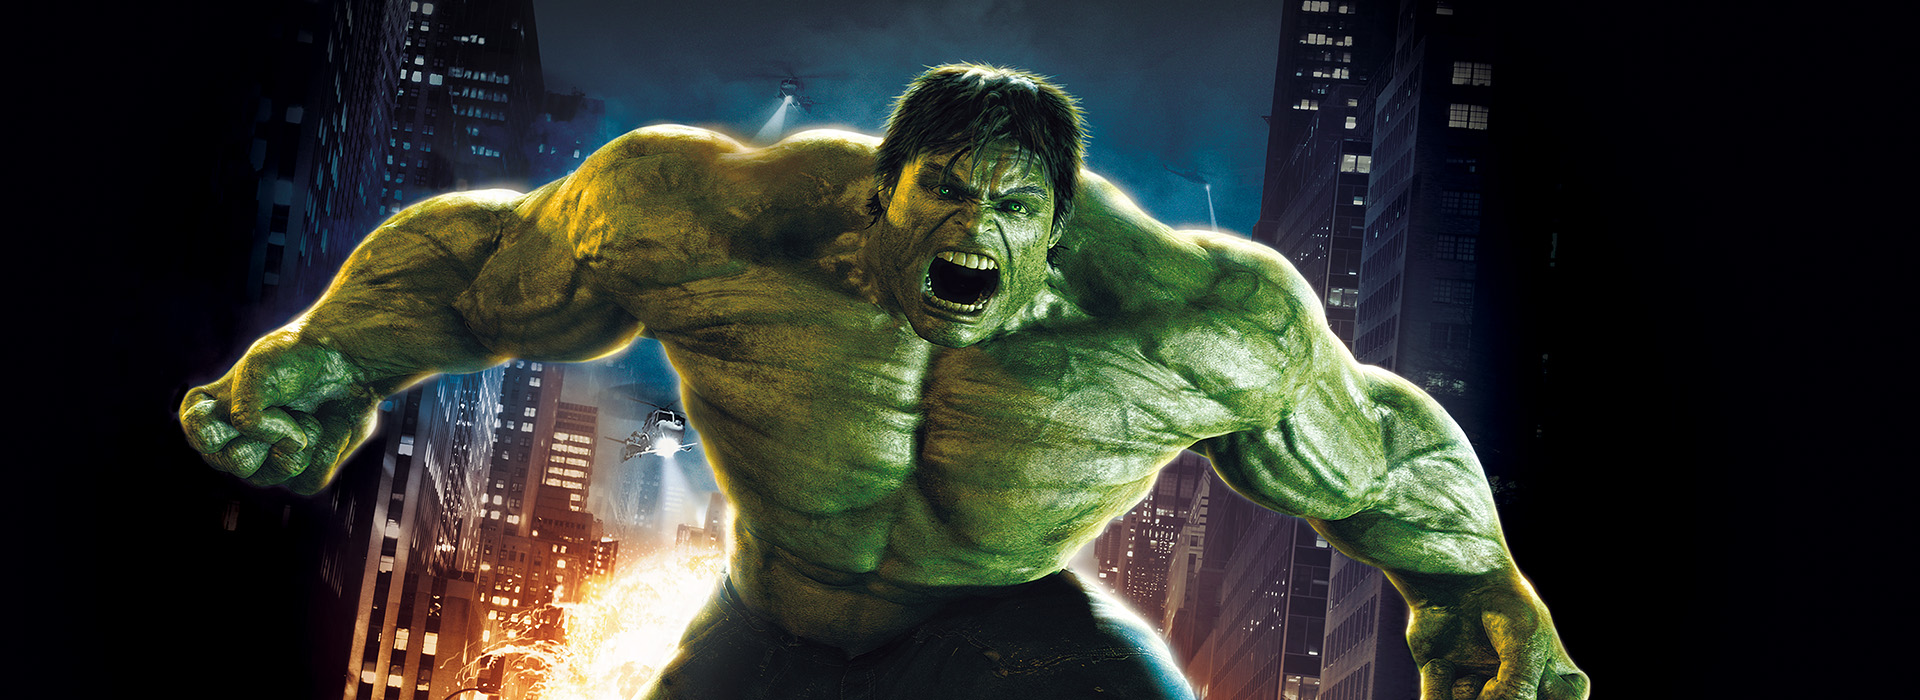 Movie poster The Incredible Hulk